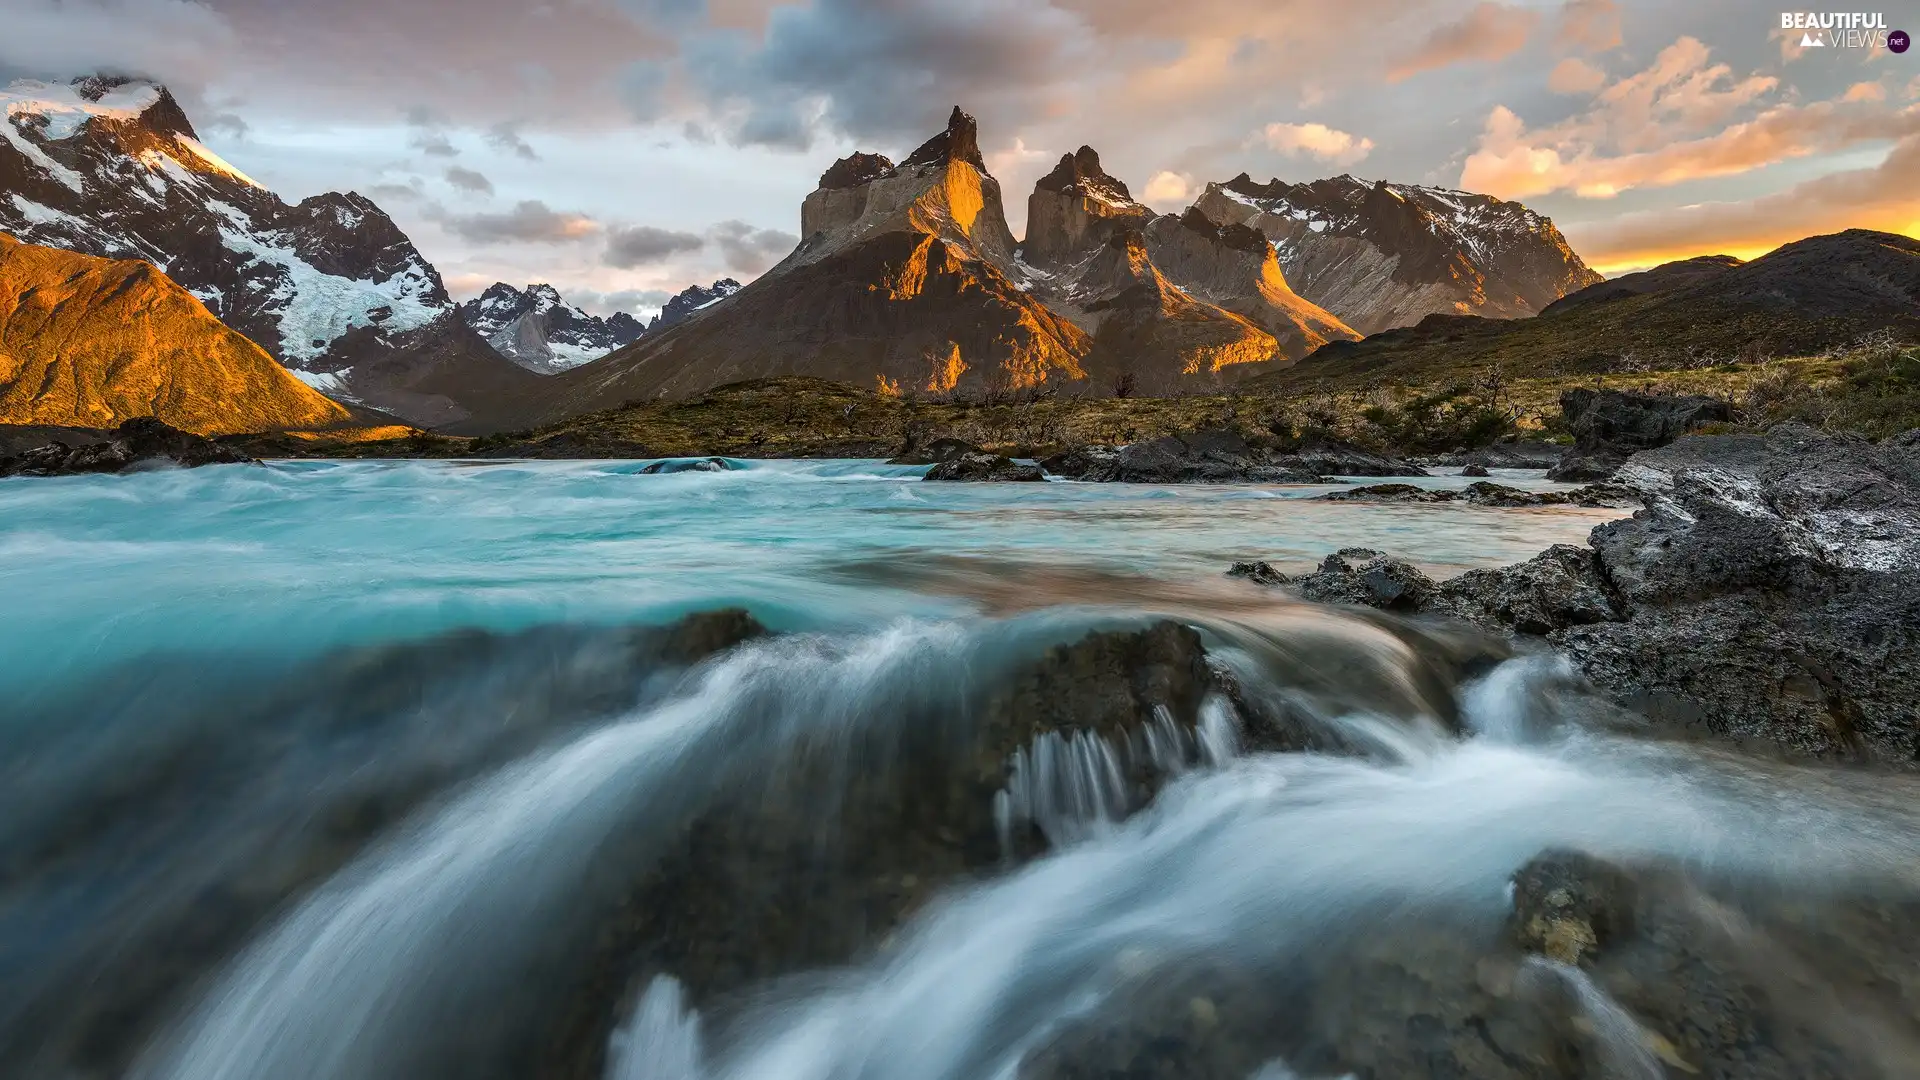 Torres del Paine National Park, Chile, Massif Torres del Paine, River, Cordillera del Paine Mountains, Patagonia